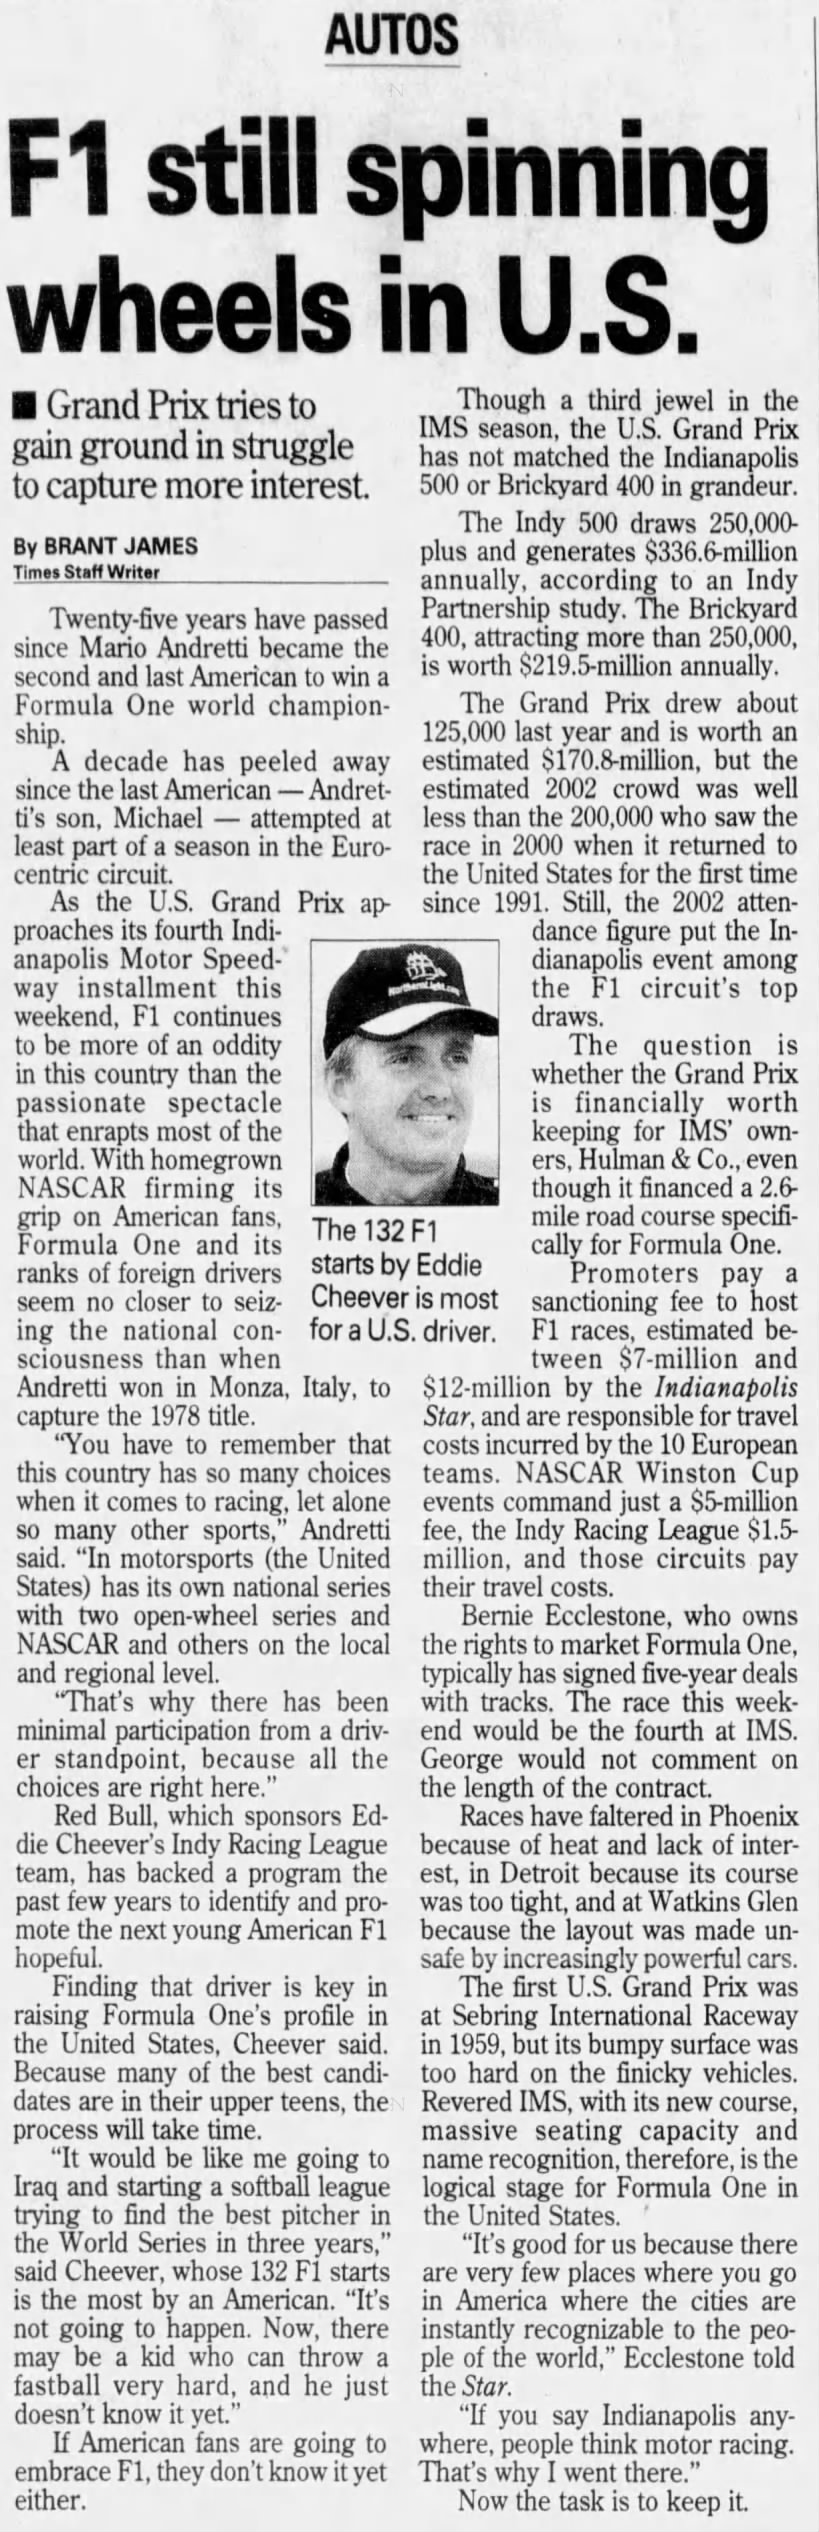 F1 still spinning wheels in U.S. - Tampa Bay Times - 25 September 2003 - Page 8C